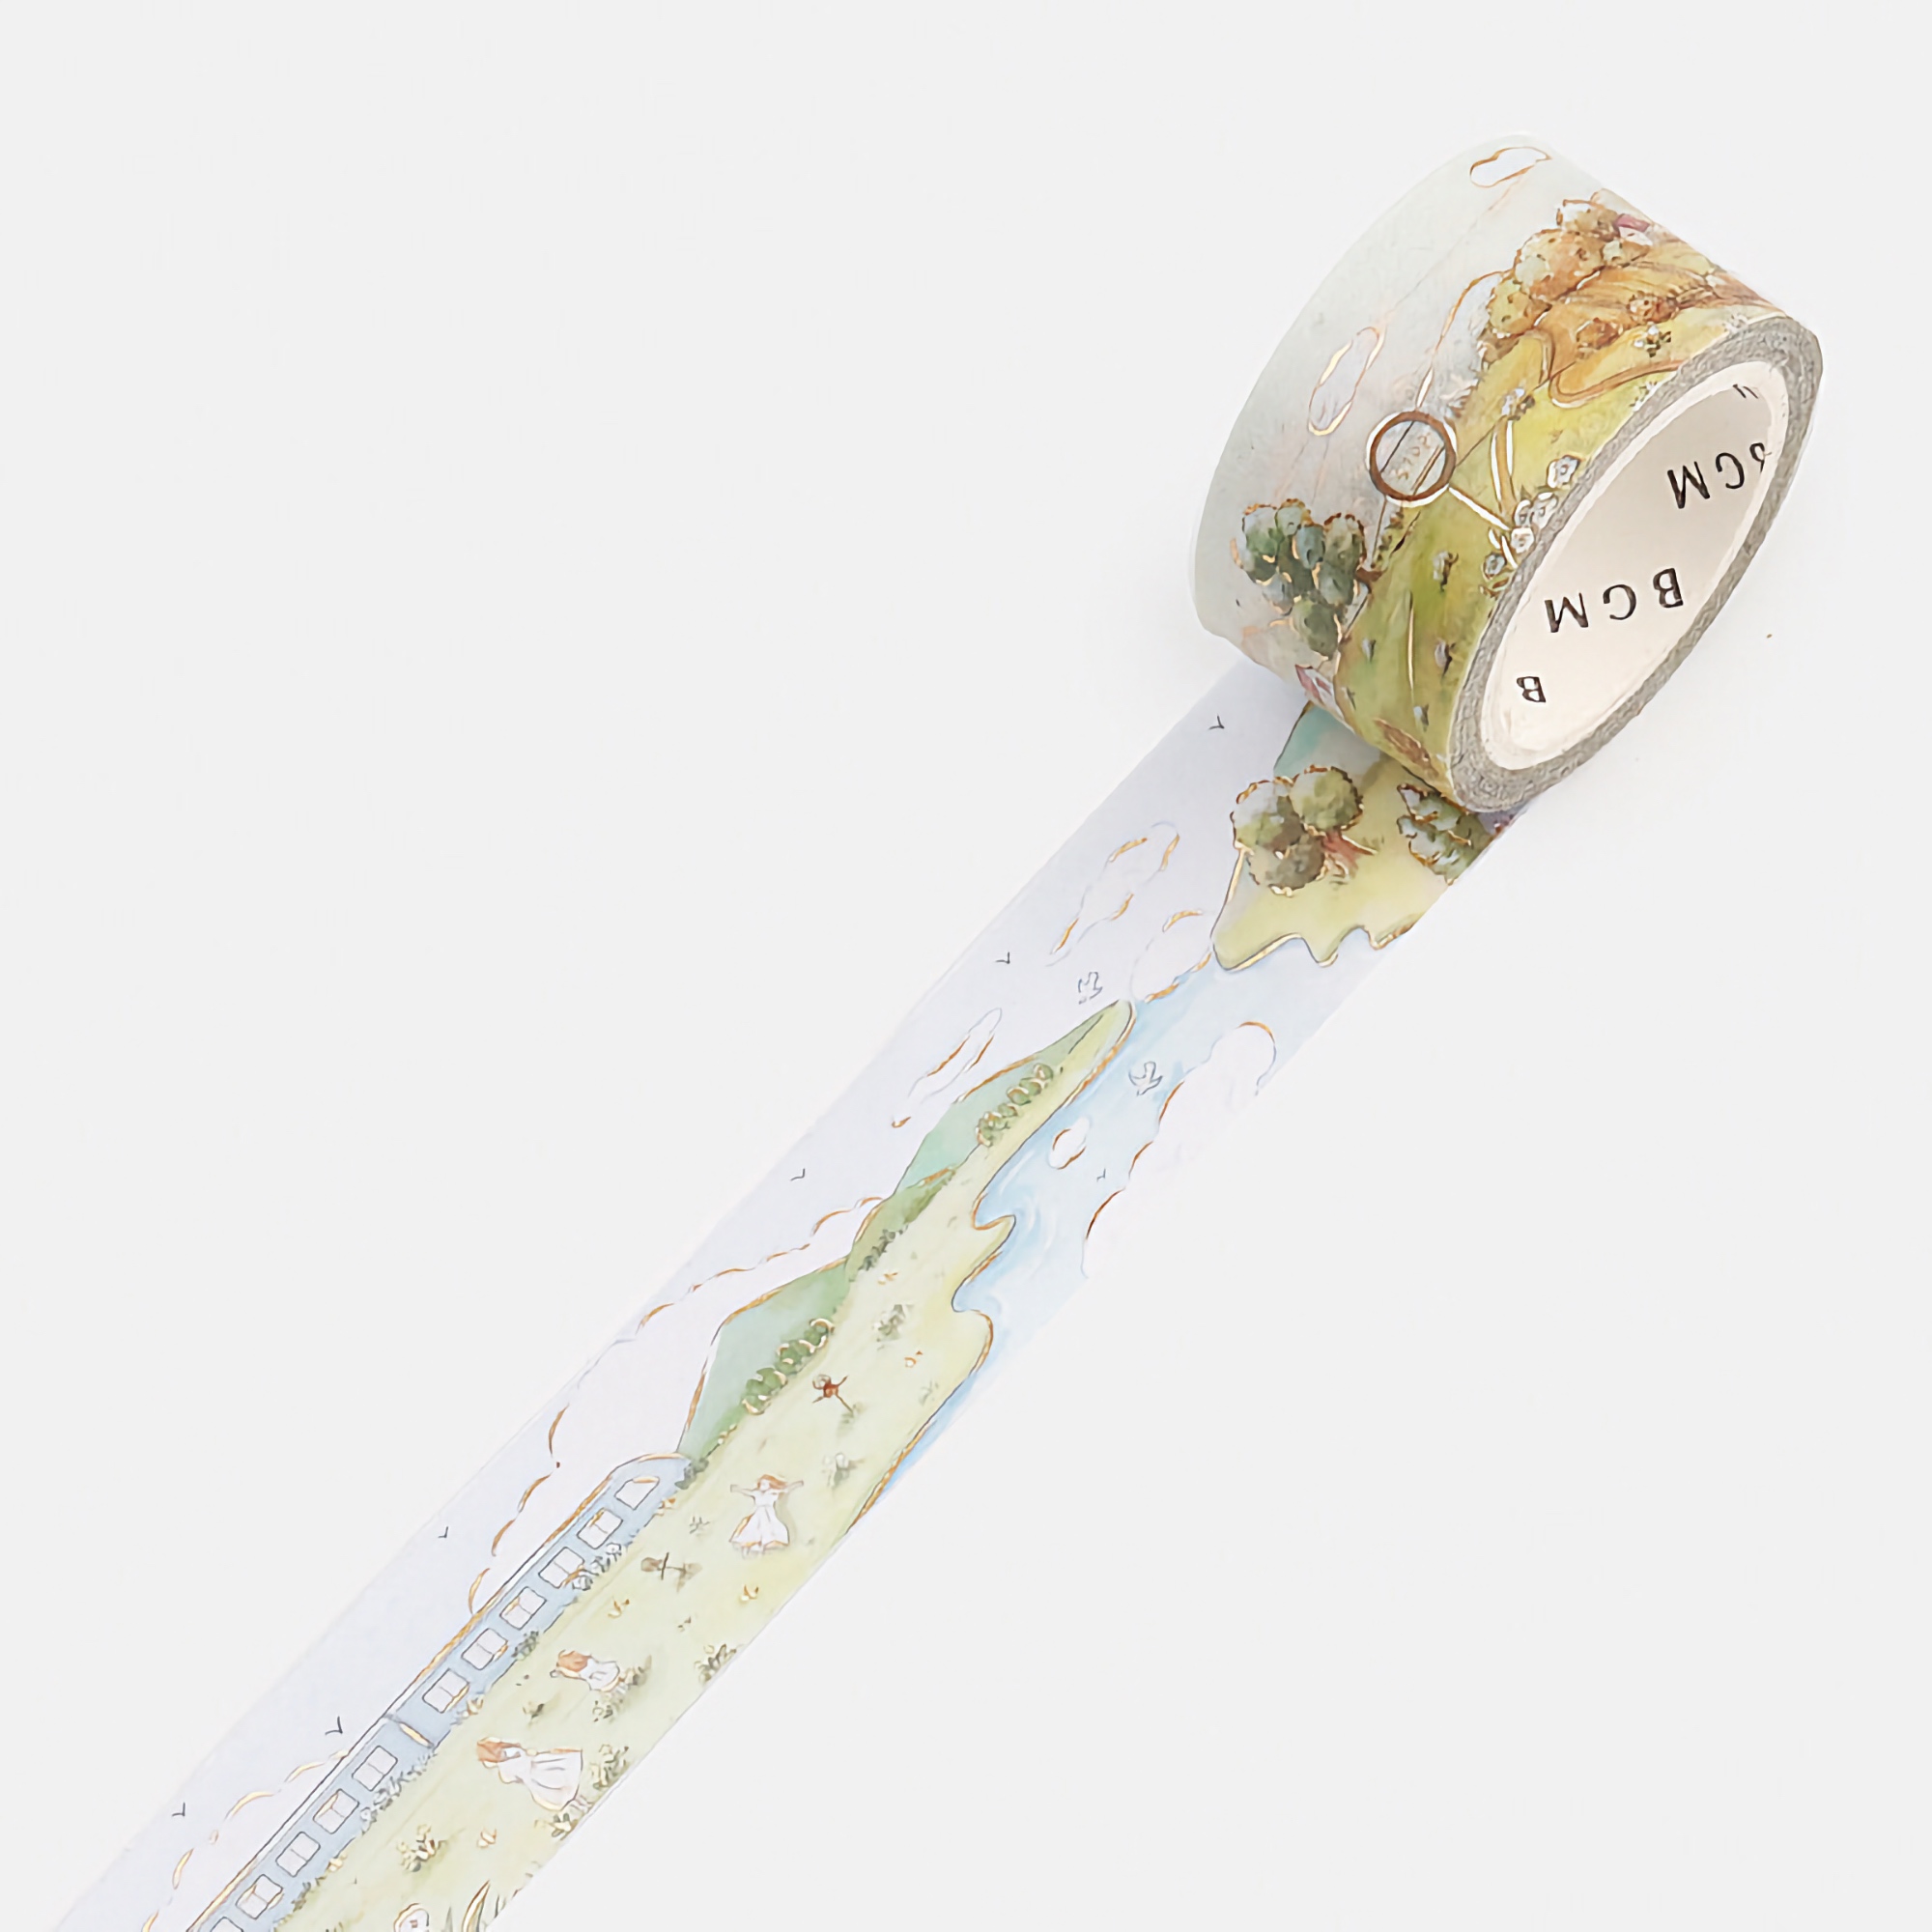 BGM Washi Tape Little World The Countryside At Dusk 20 mm